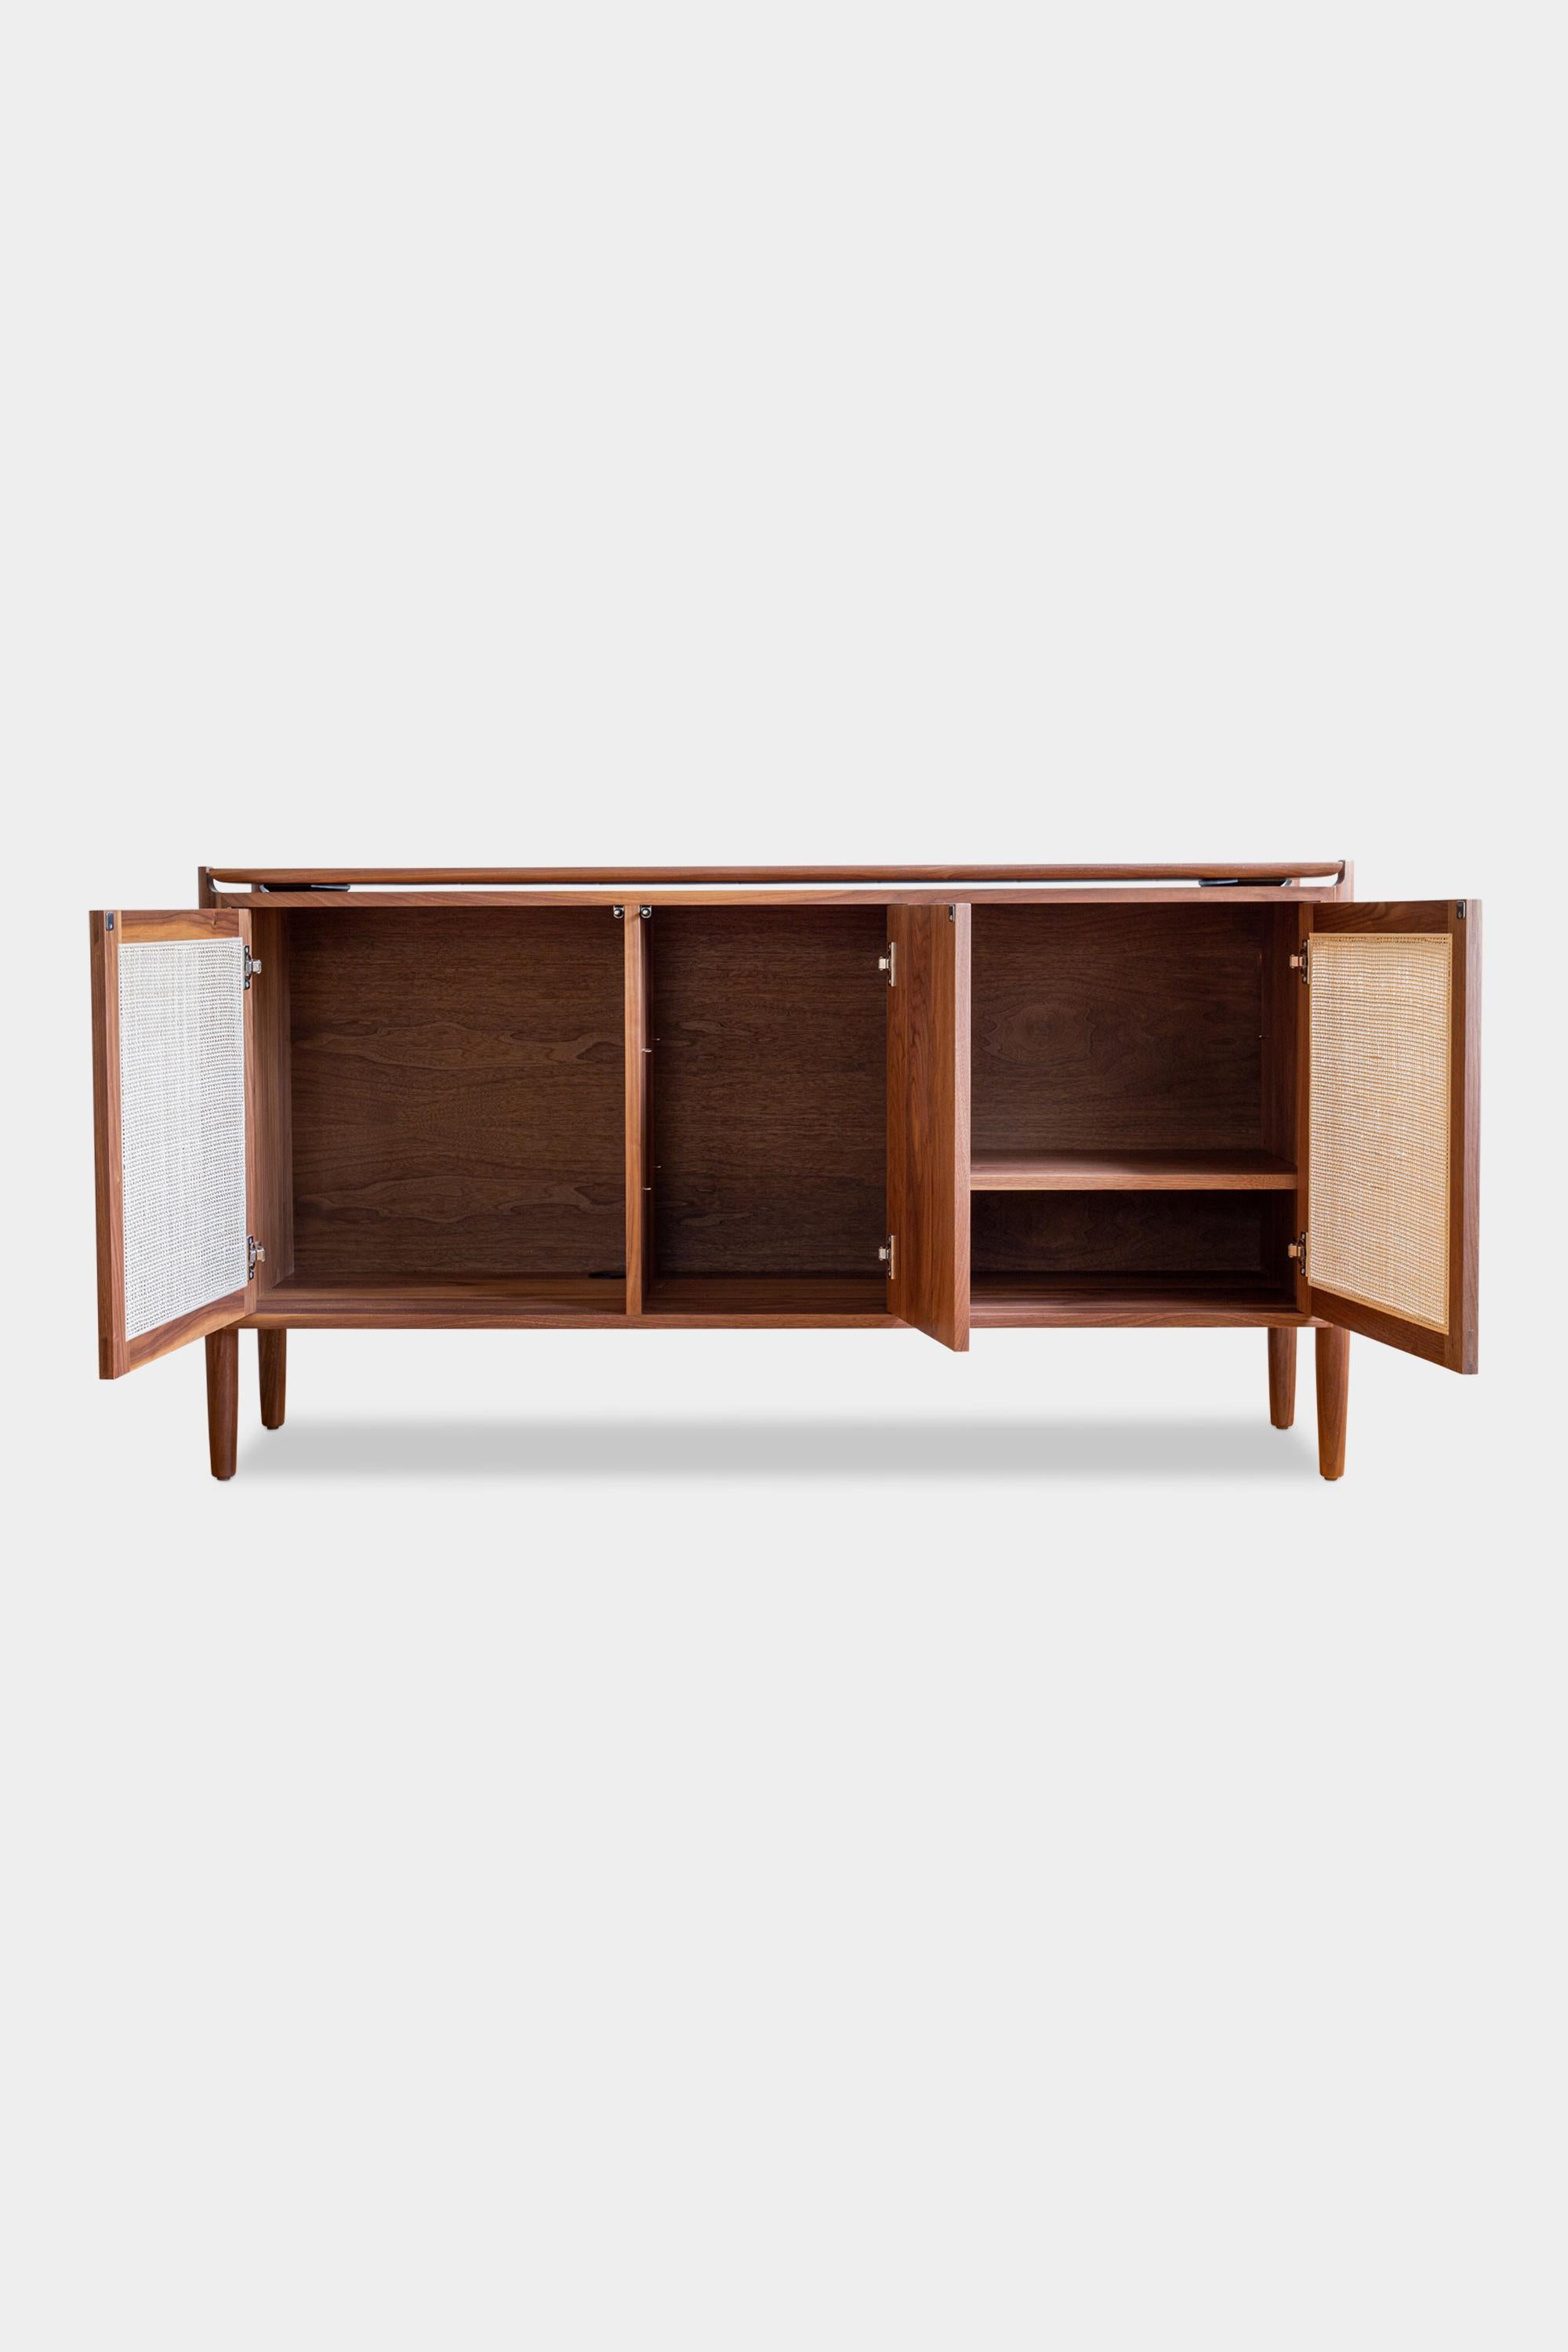 Solid wood constructed sideboard cabinet featuring hand-turned legs, hand-cut joinery and adjustable shelves. It details two push-to-open, cane detailed cabinet doors and one solid wood push-to-open cabinet door. There are custom configurations